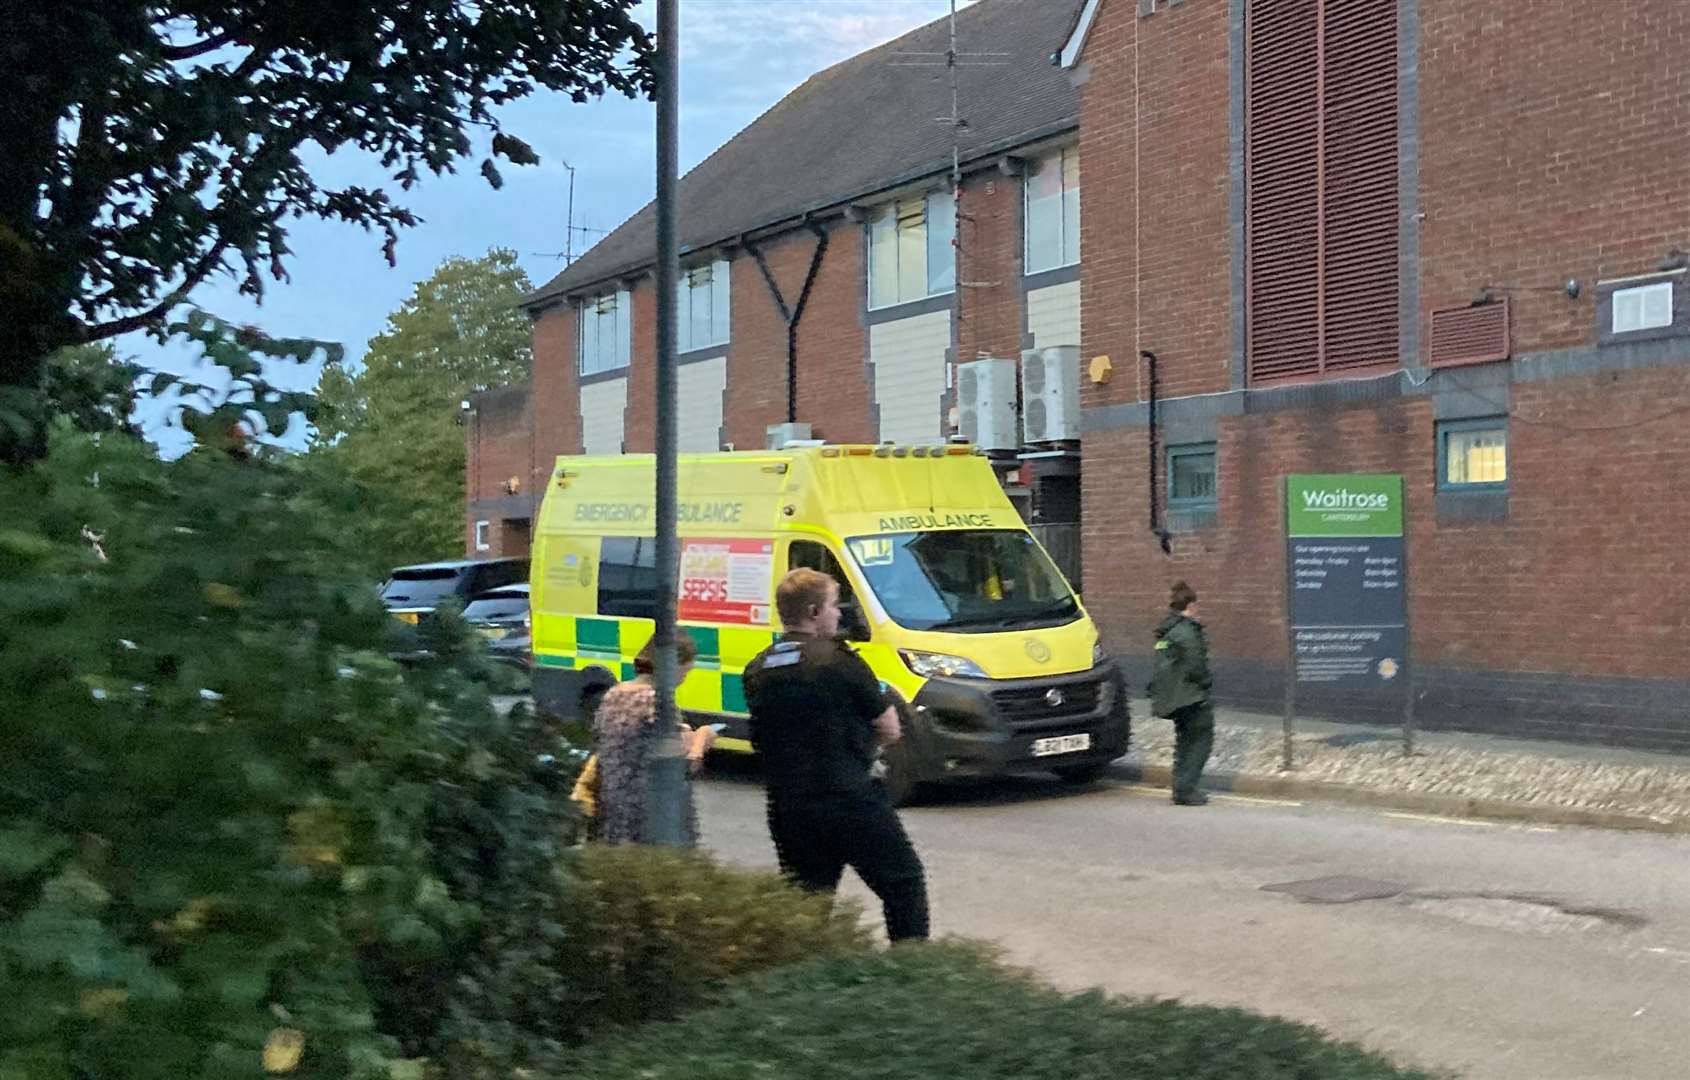 One of the police officers present, with an ambulance, at the scene behind Waitrose in Canterbury